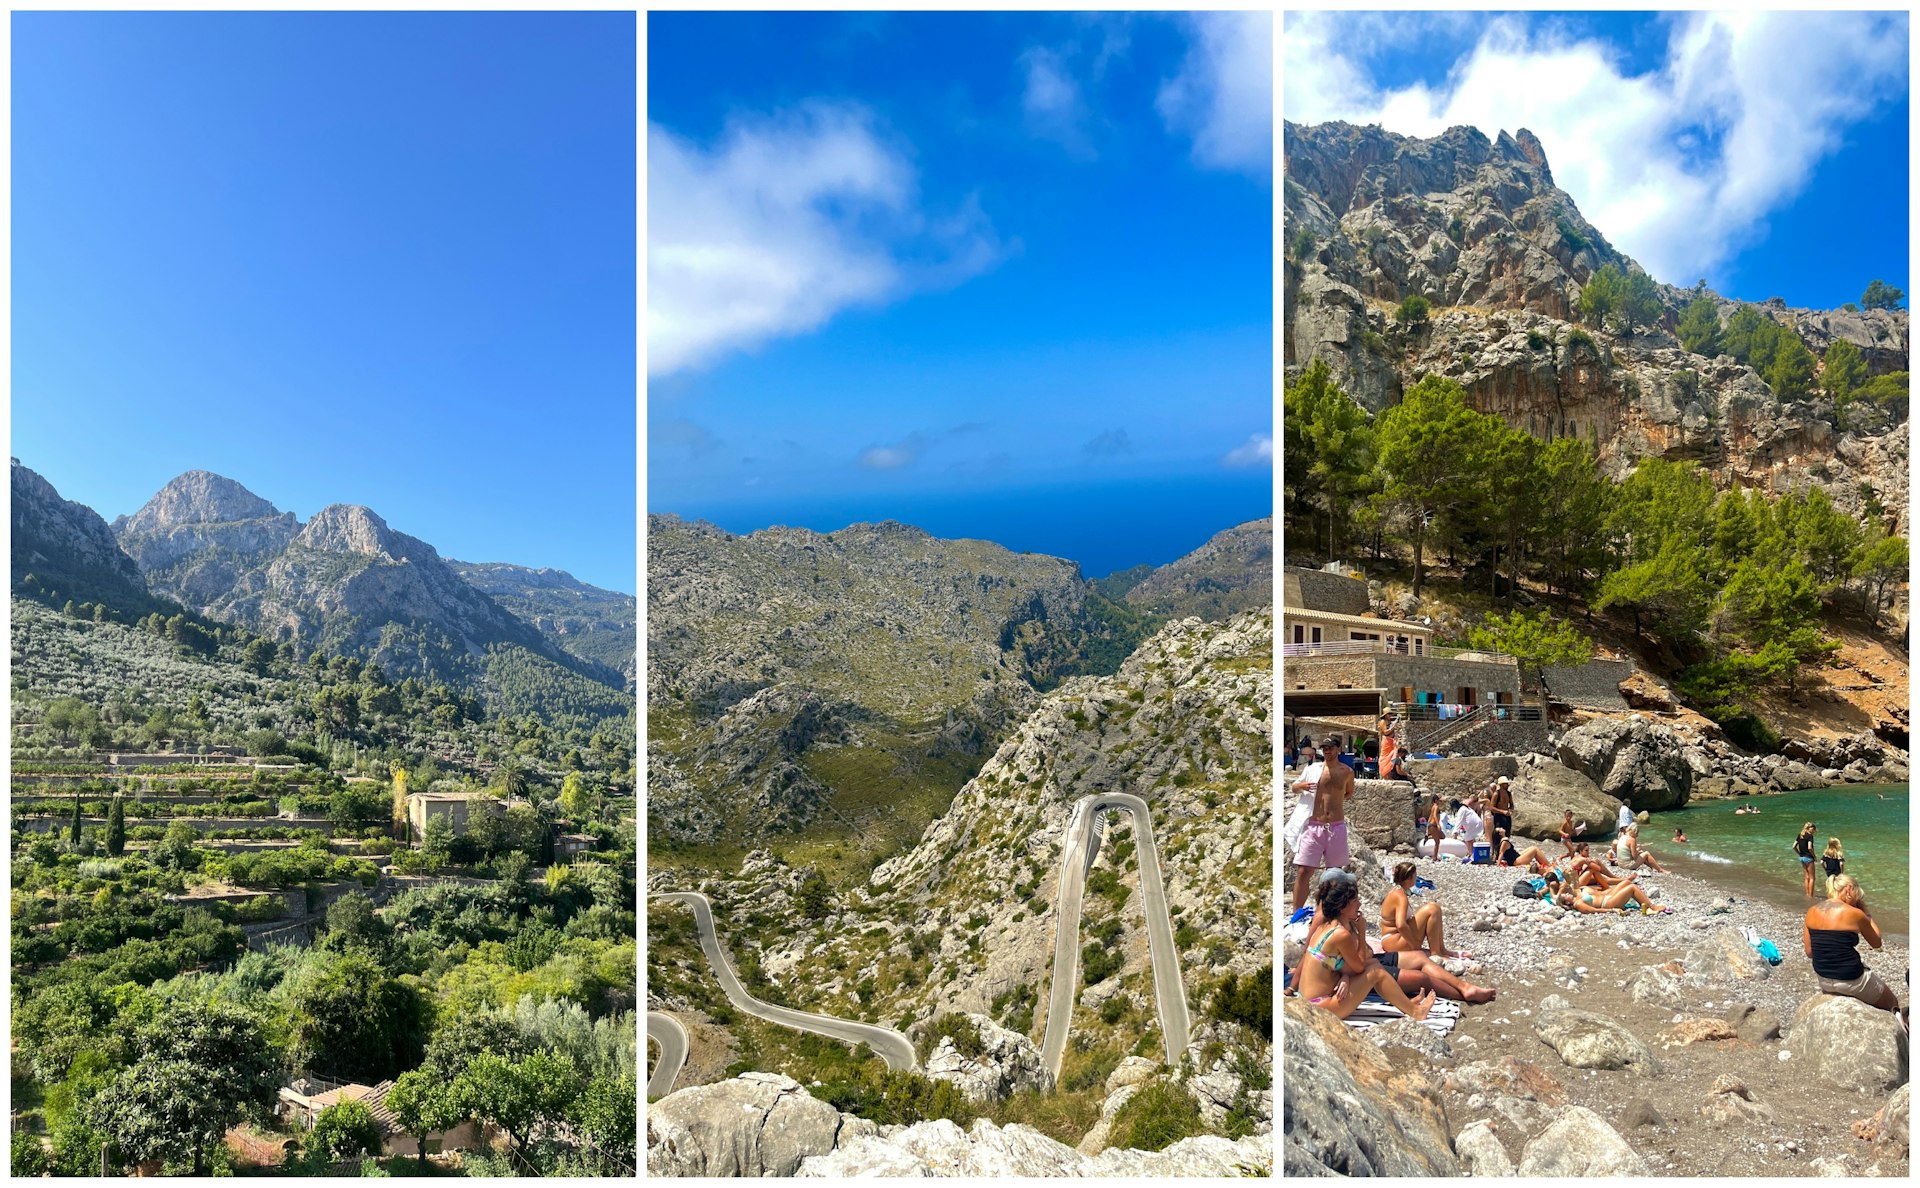 The lush green valleys, mountain roads and rocky beaches of Mallorca's northwest coast